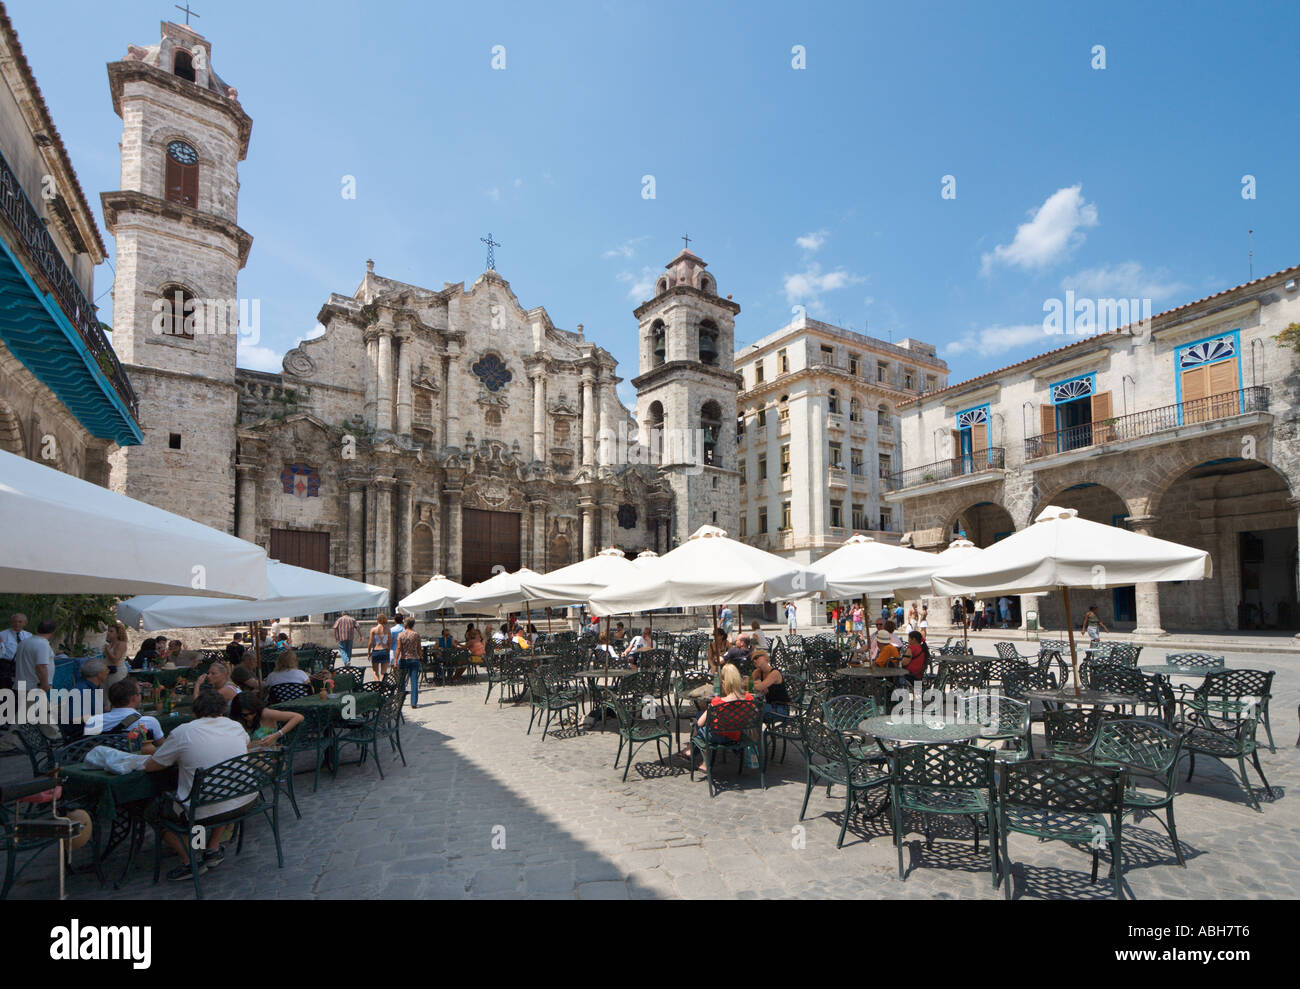 Street cafe in front of the Cathedral, Plaza de la Catedral, Habana Vieja,Havana, Cuba Stock Photo